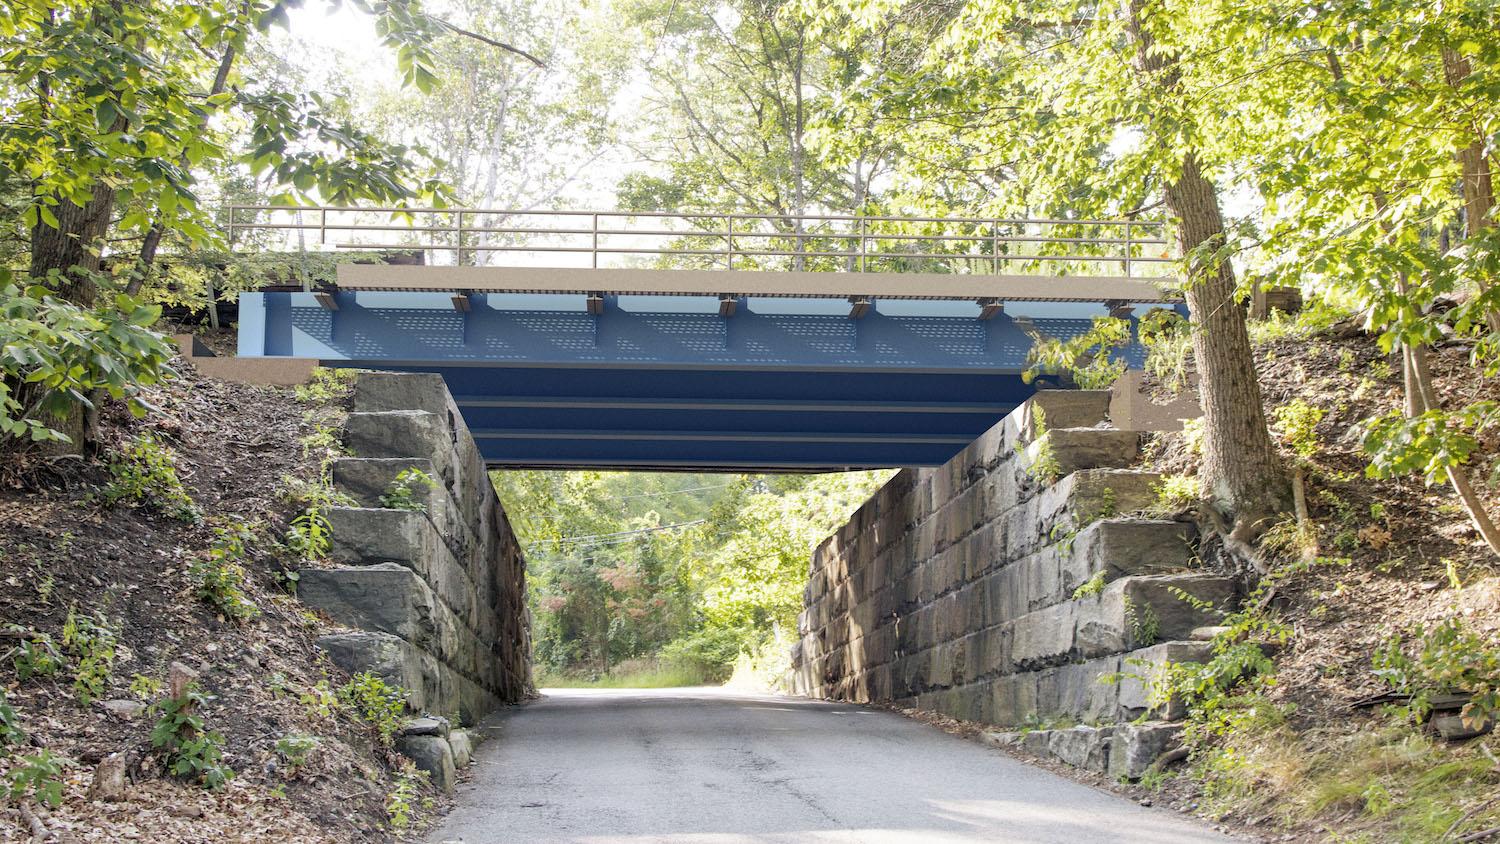 A rendering shows how a new bridge over Intervale Road in Weston will look upon completion